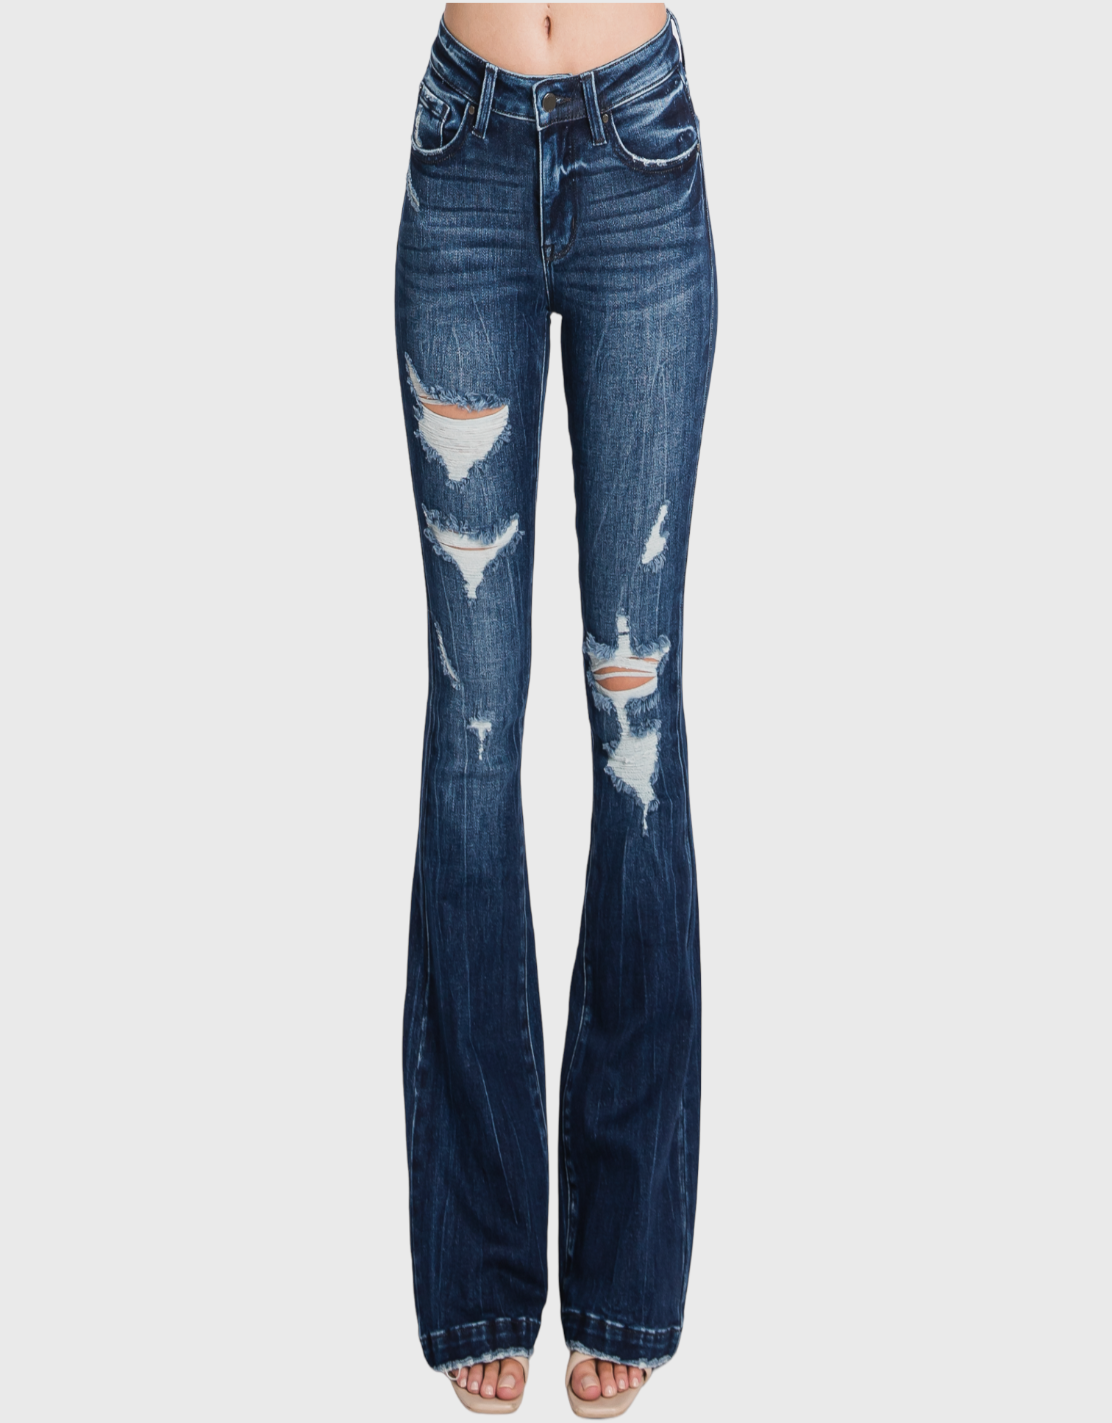 Petra Distressed Jeans